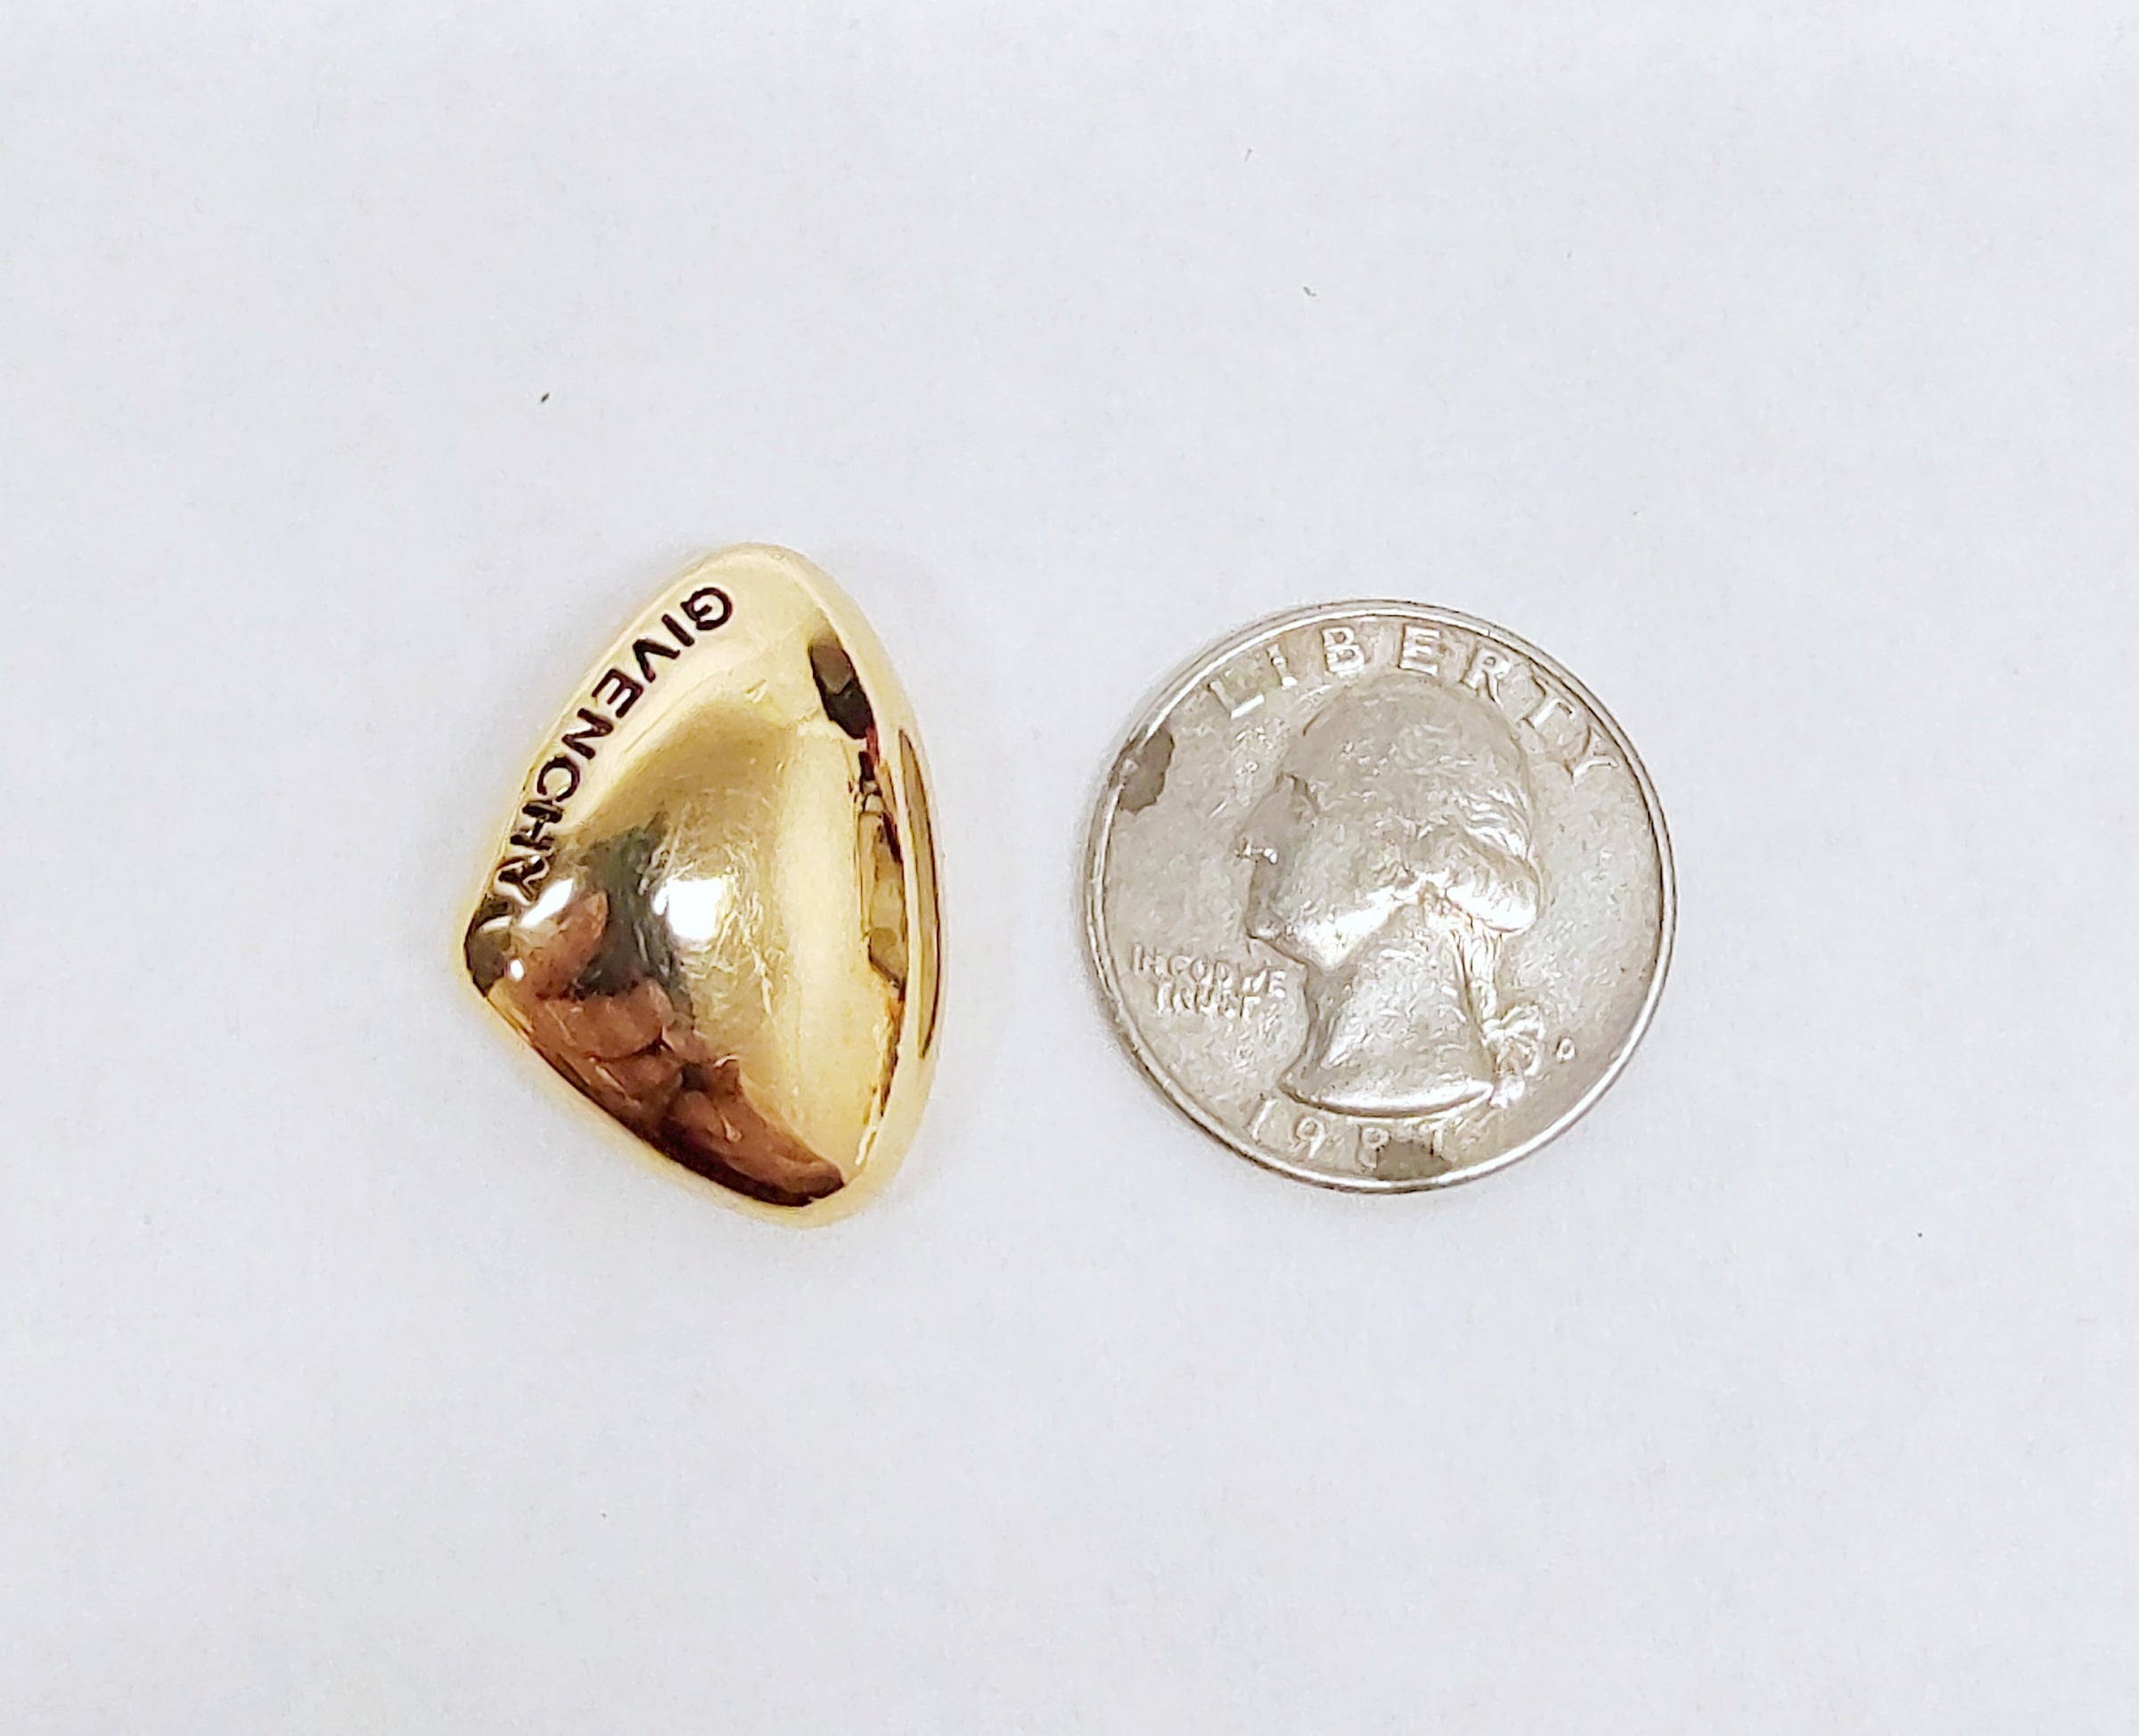 Givenchy Logo Gold Tone Clip-On Earrings Paris- New York - Hers and His Treasures